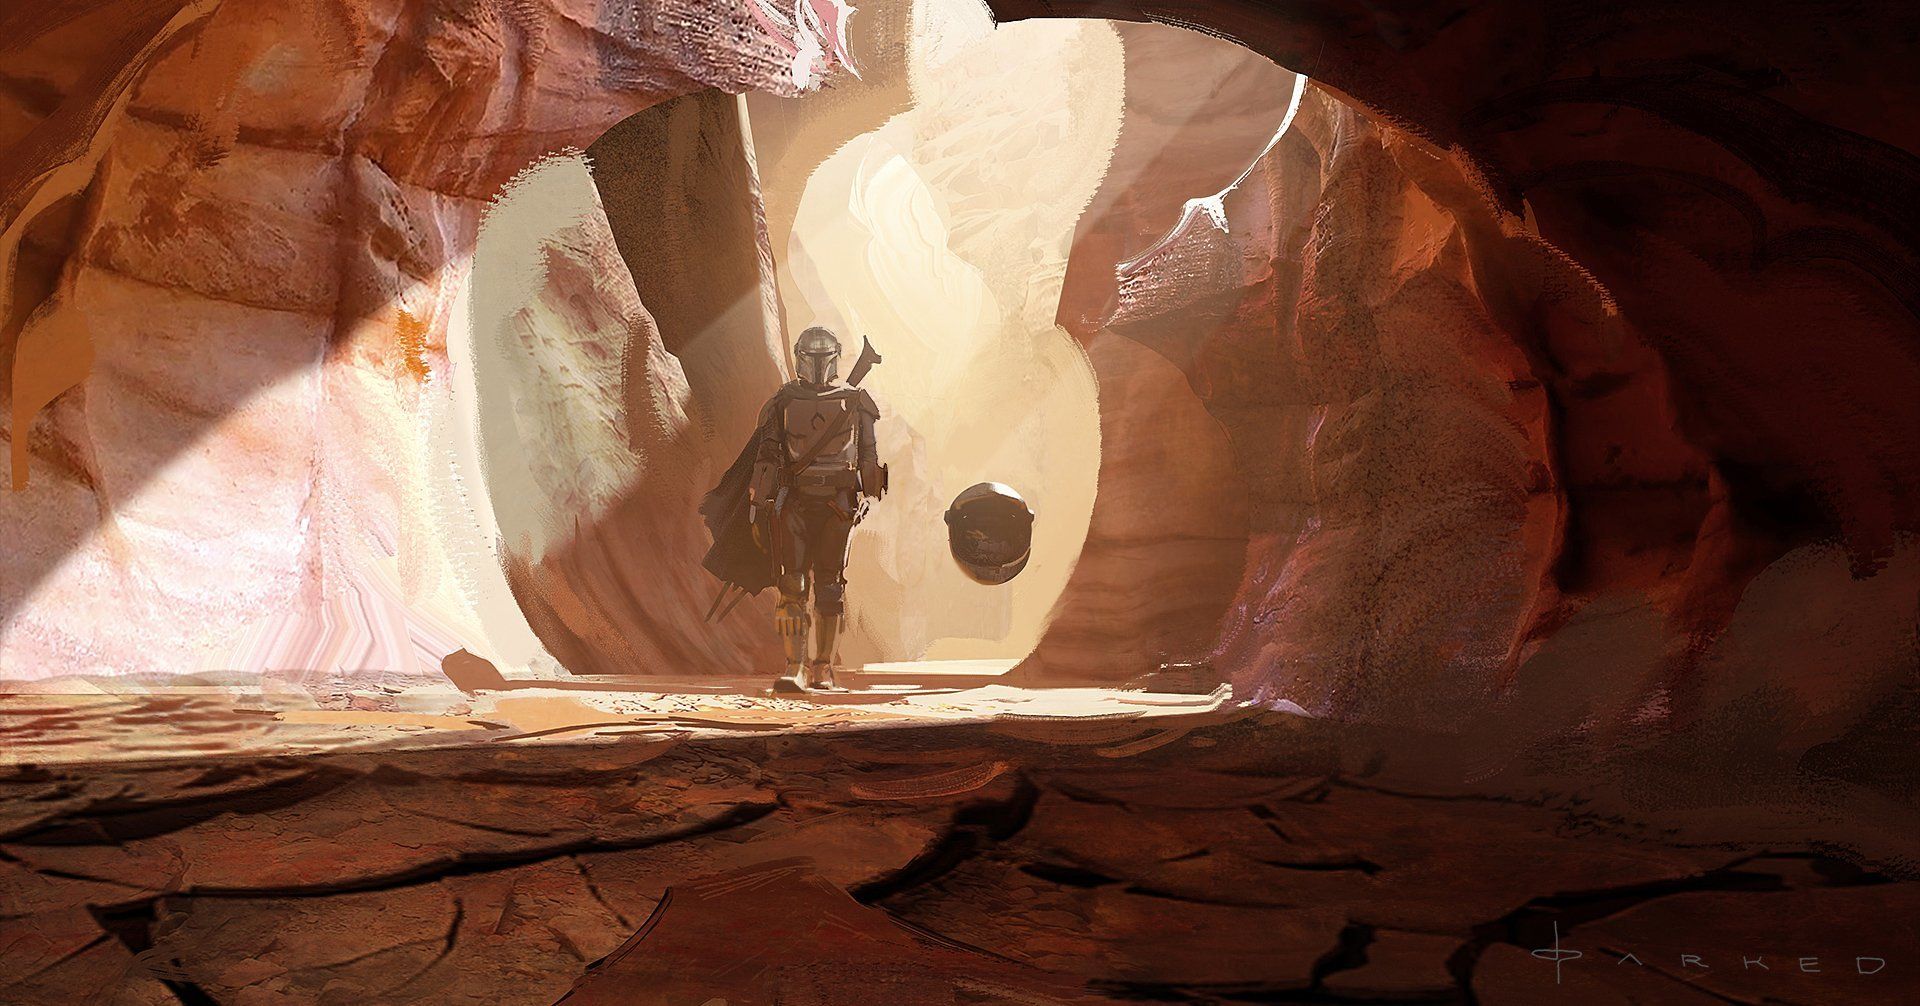 The Mandalorian: Check Out This Concept Art From Chapter 2